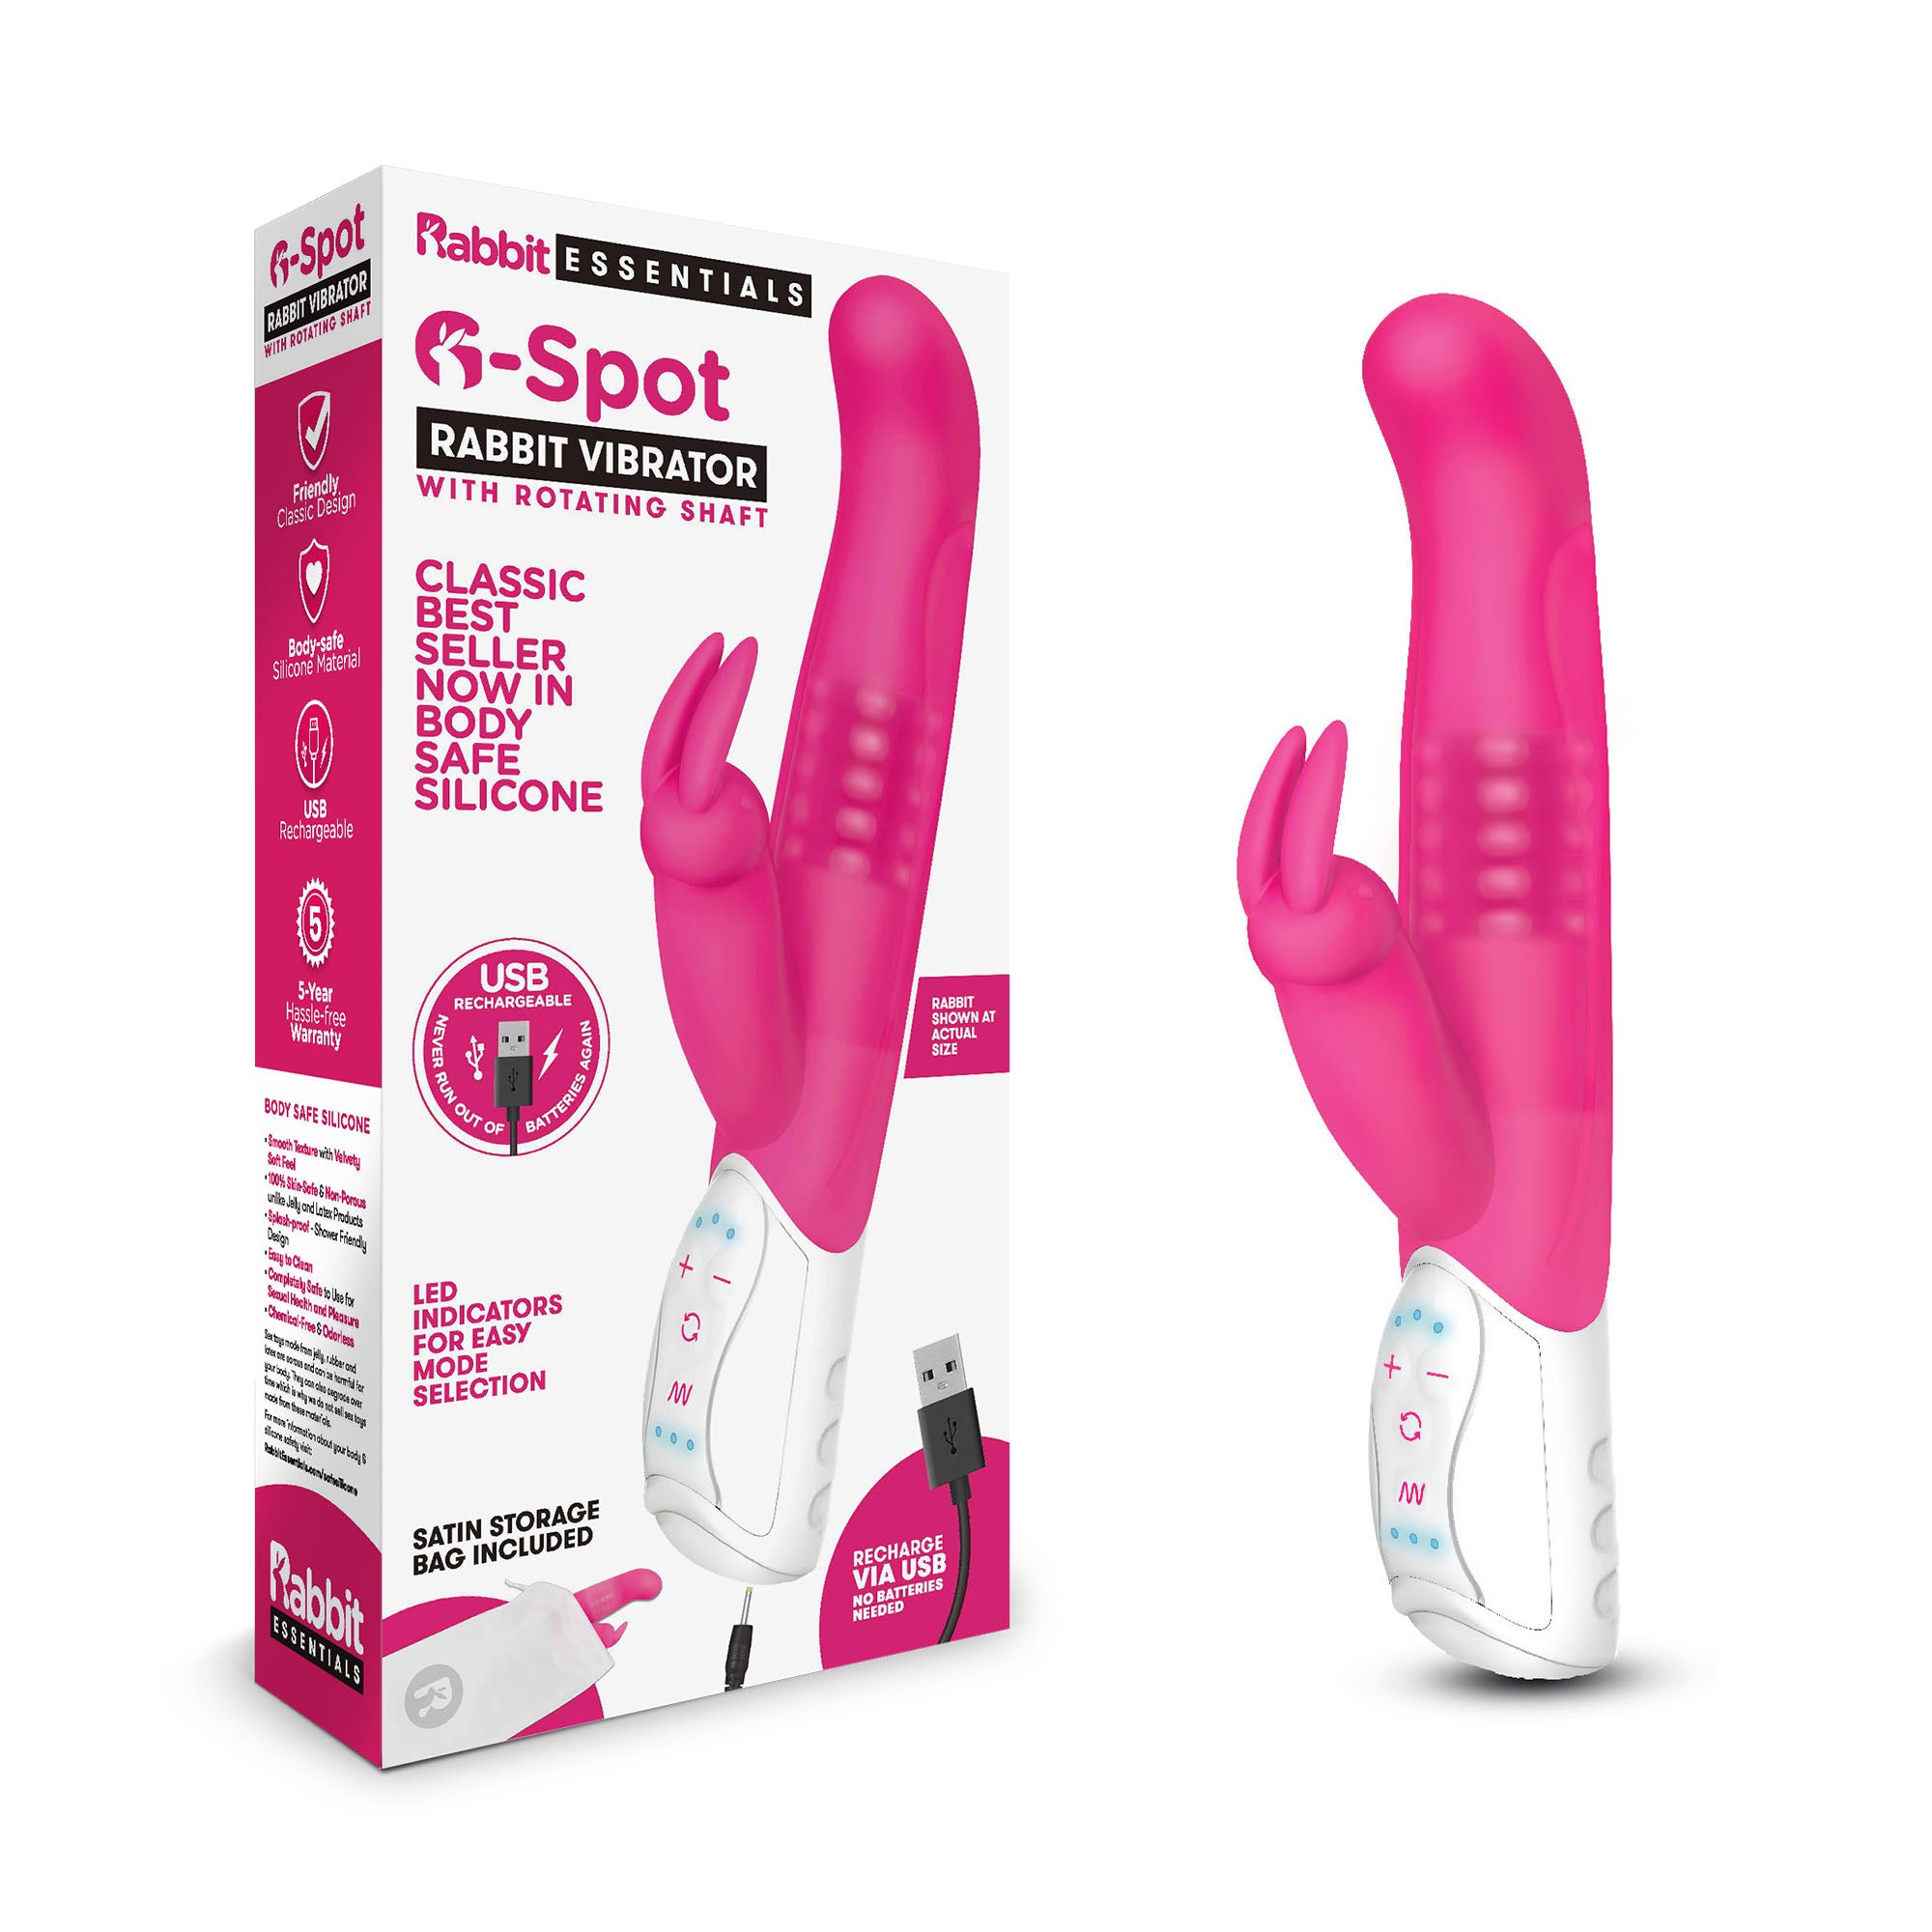 Packaging of Rabbit Essentials G-Spot Rabbit Vibrator with Rotating Shaft in Pink at glastoy.com